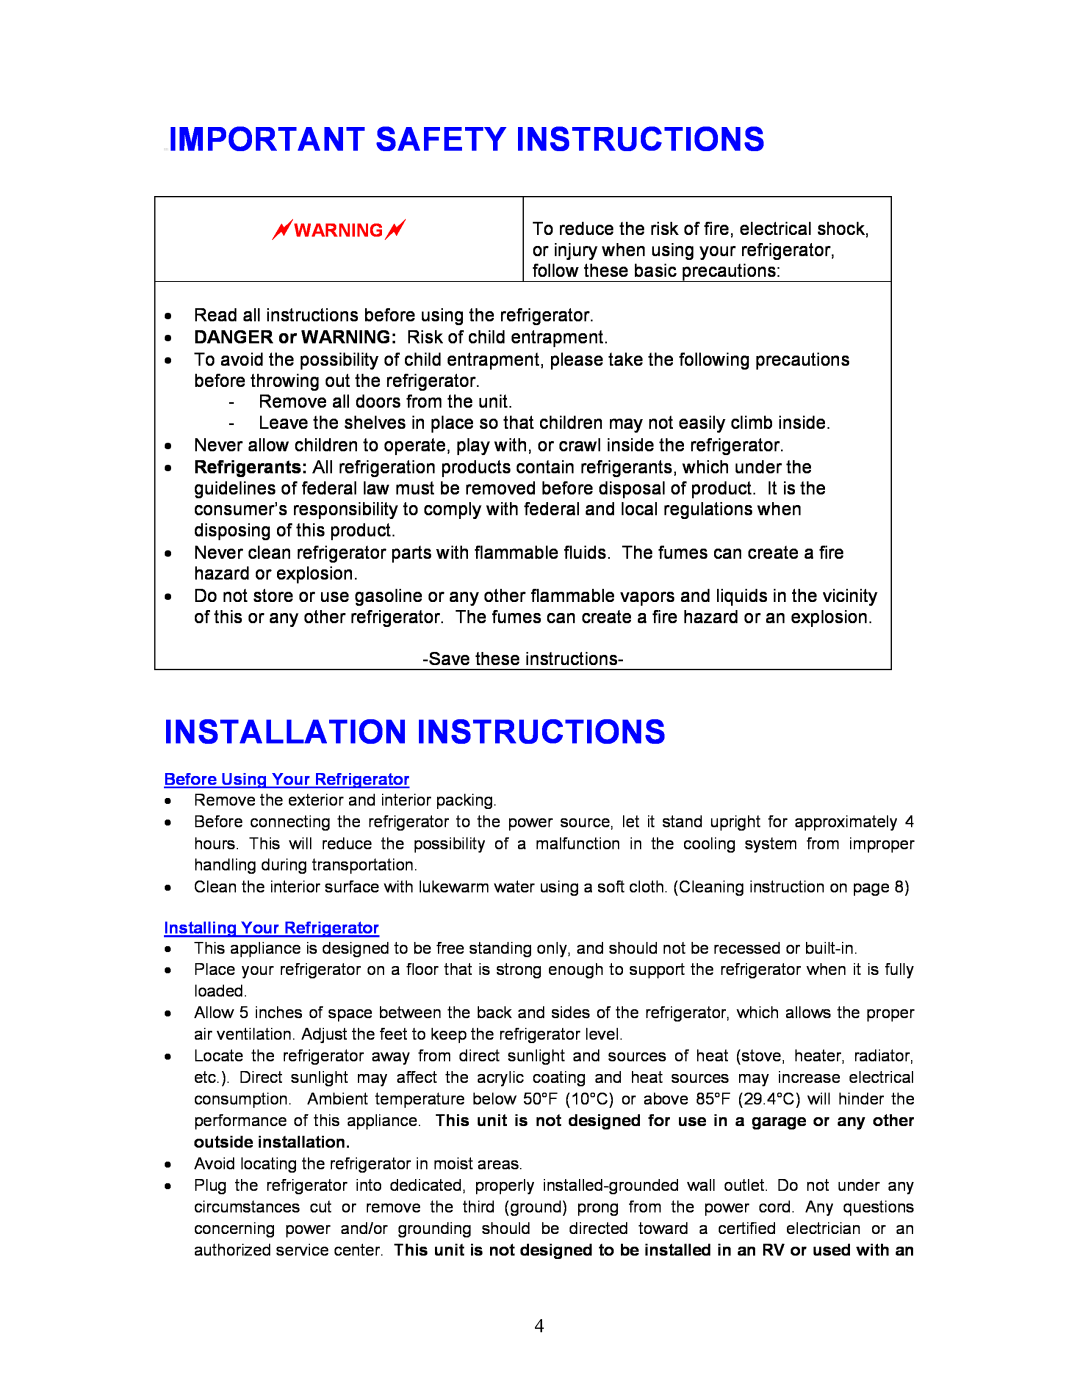 Magic Chef MCBR240S, MCBR240B instruction manual Important Safety Instructions, Installation Instructions 